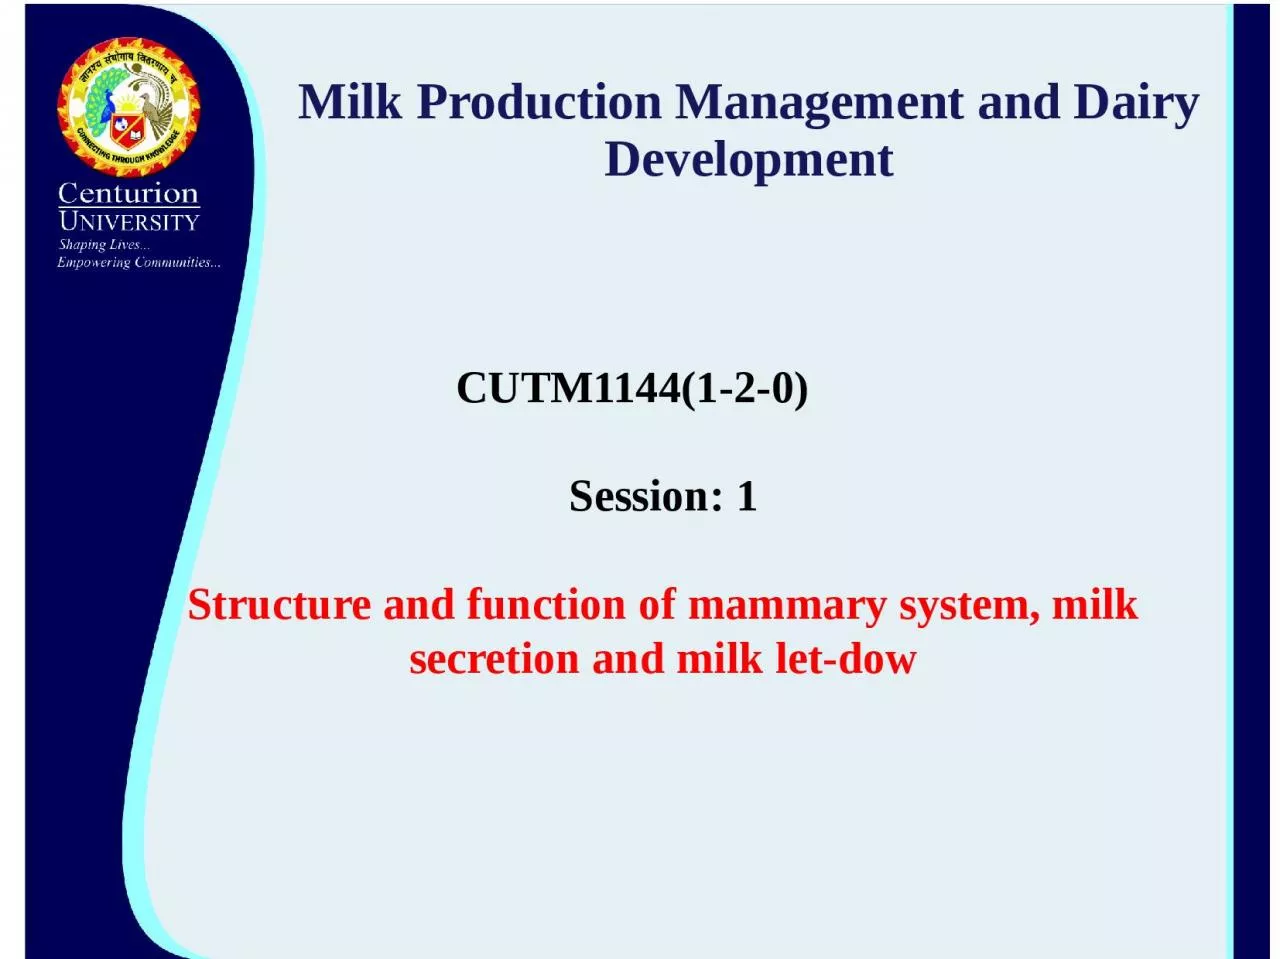 Milk Production Management and Dairy Development